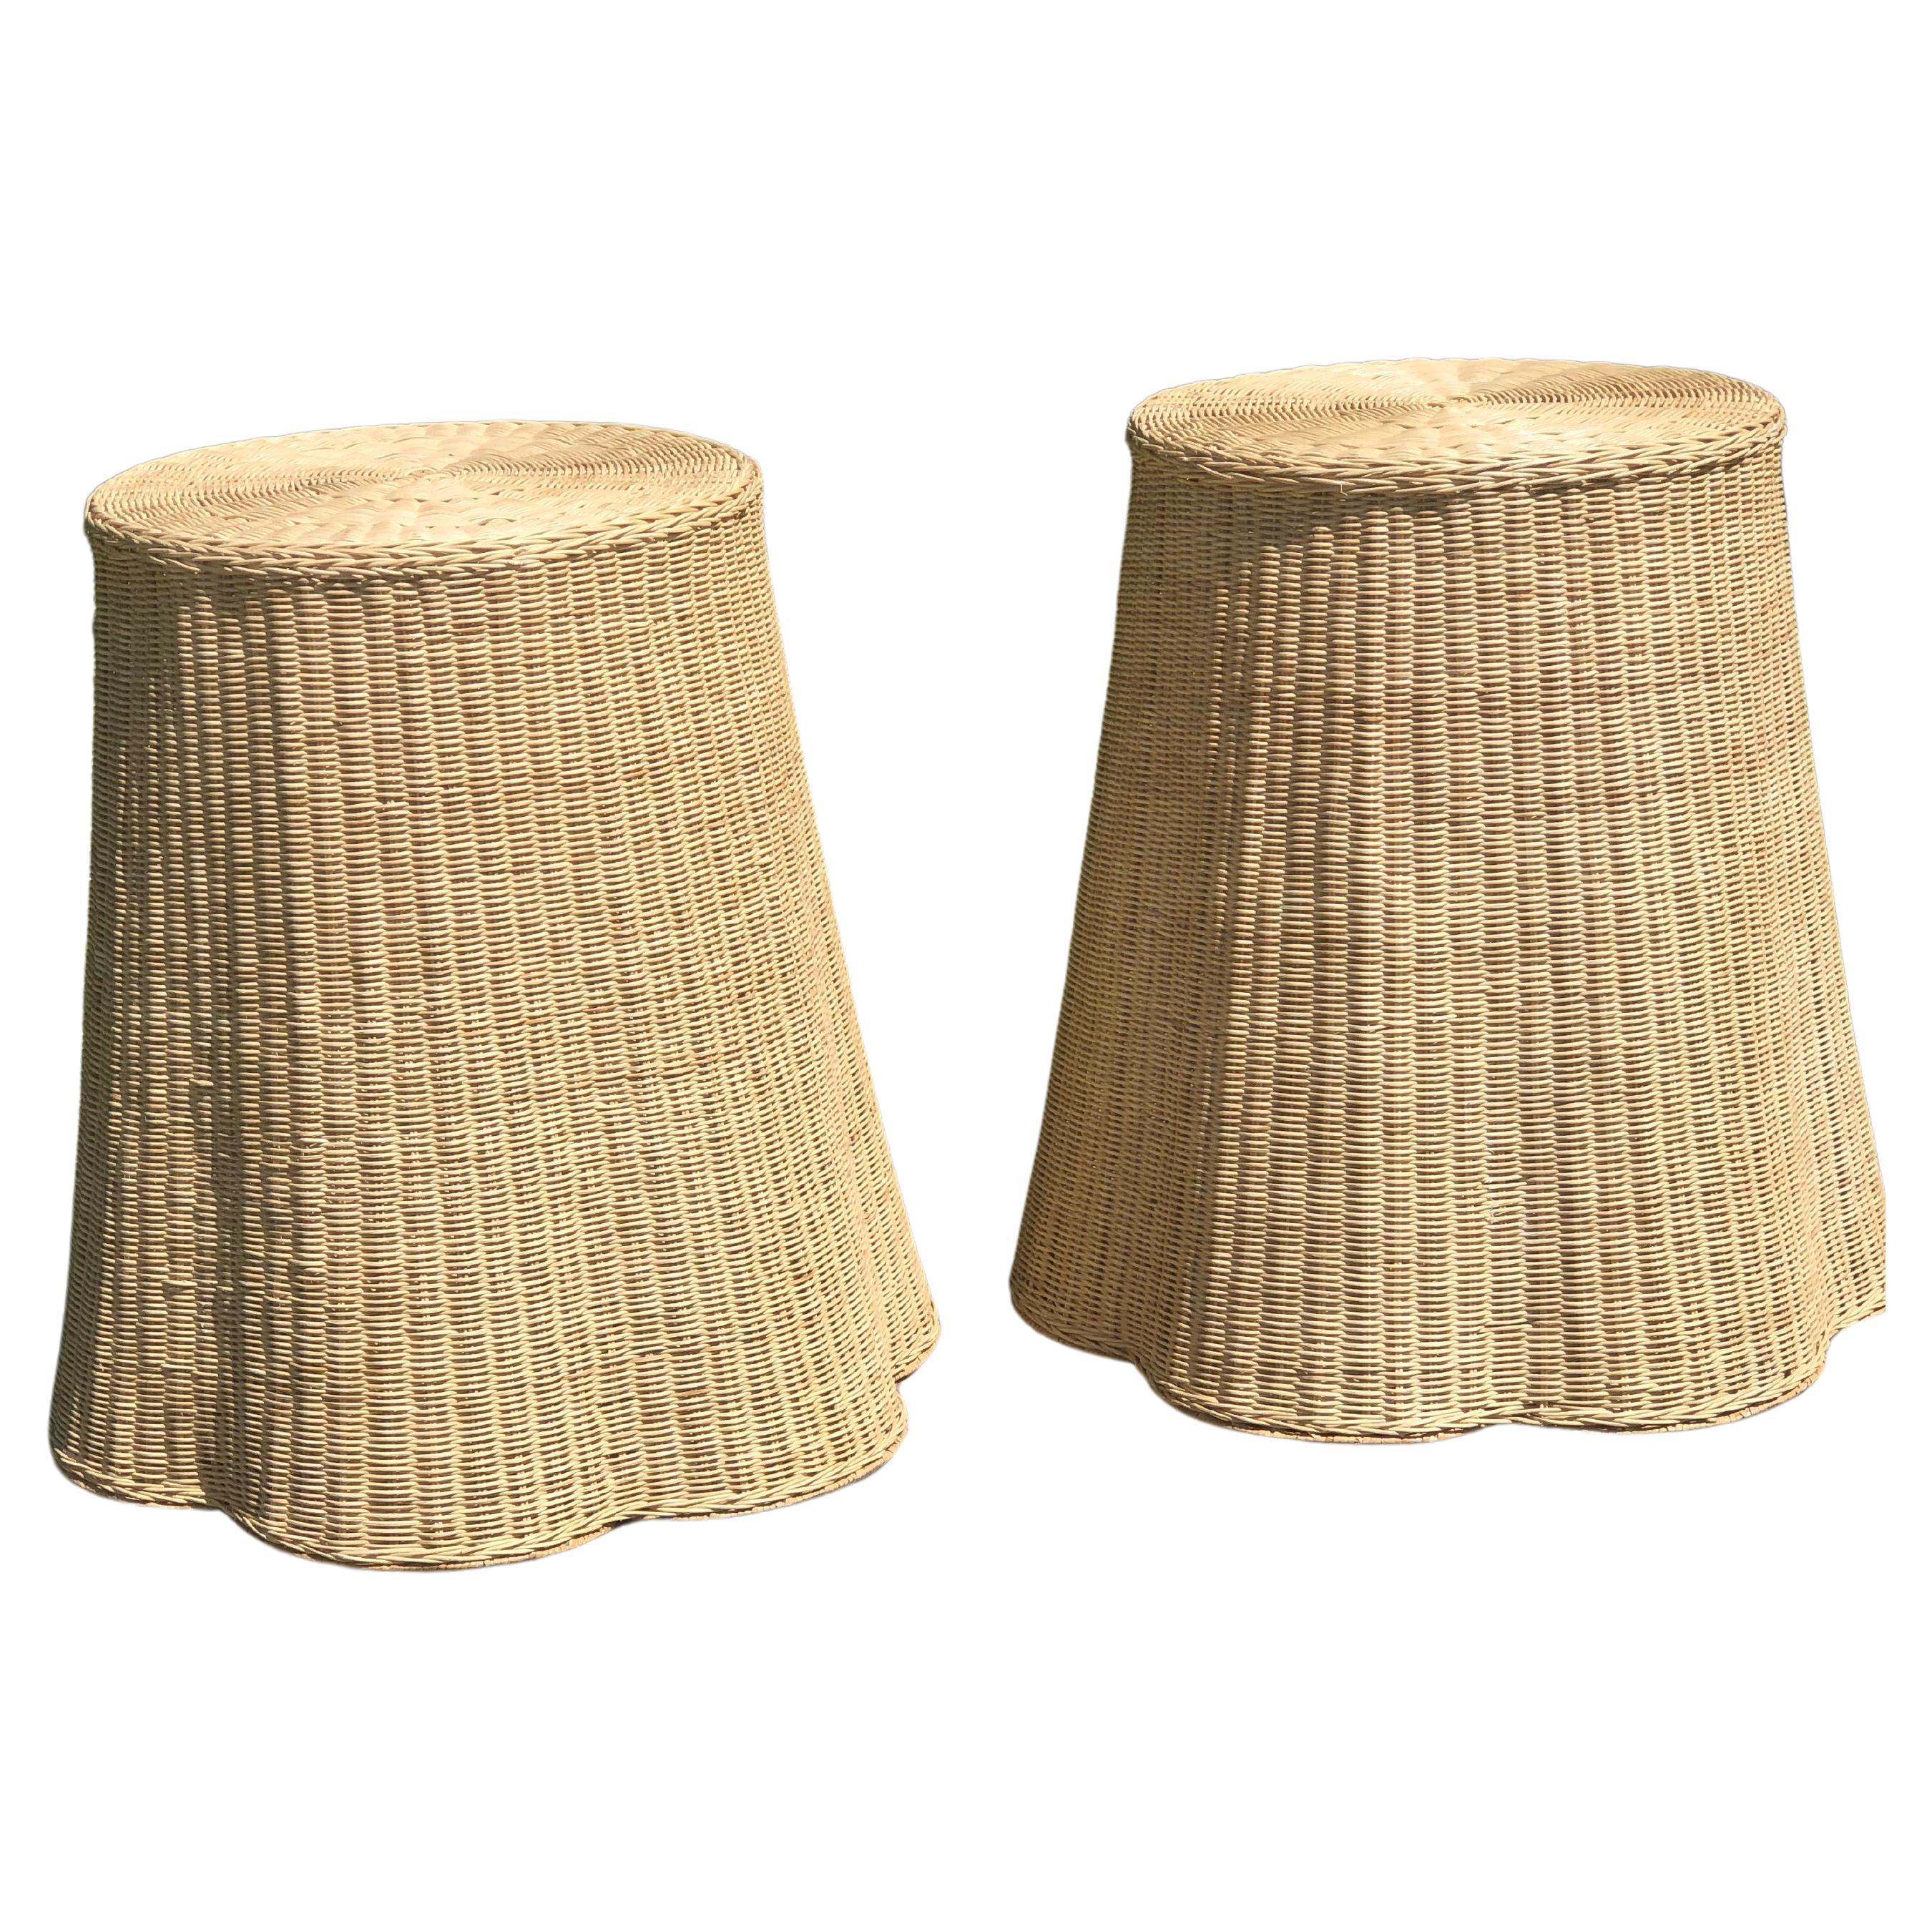 Pair of Vintage Trompe L'oeil Draped Wicker "Ghost" Side Table For Sale